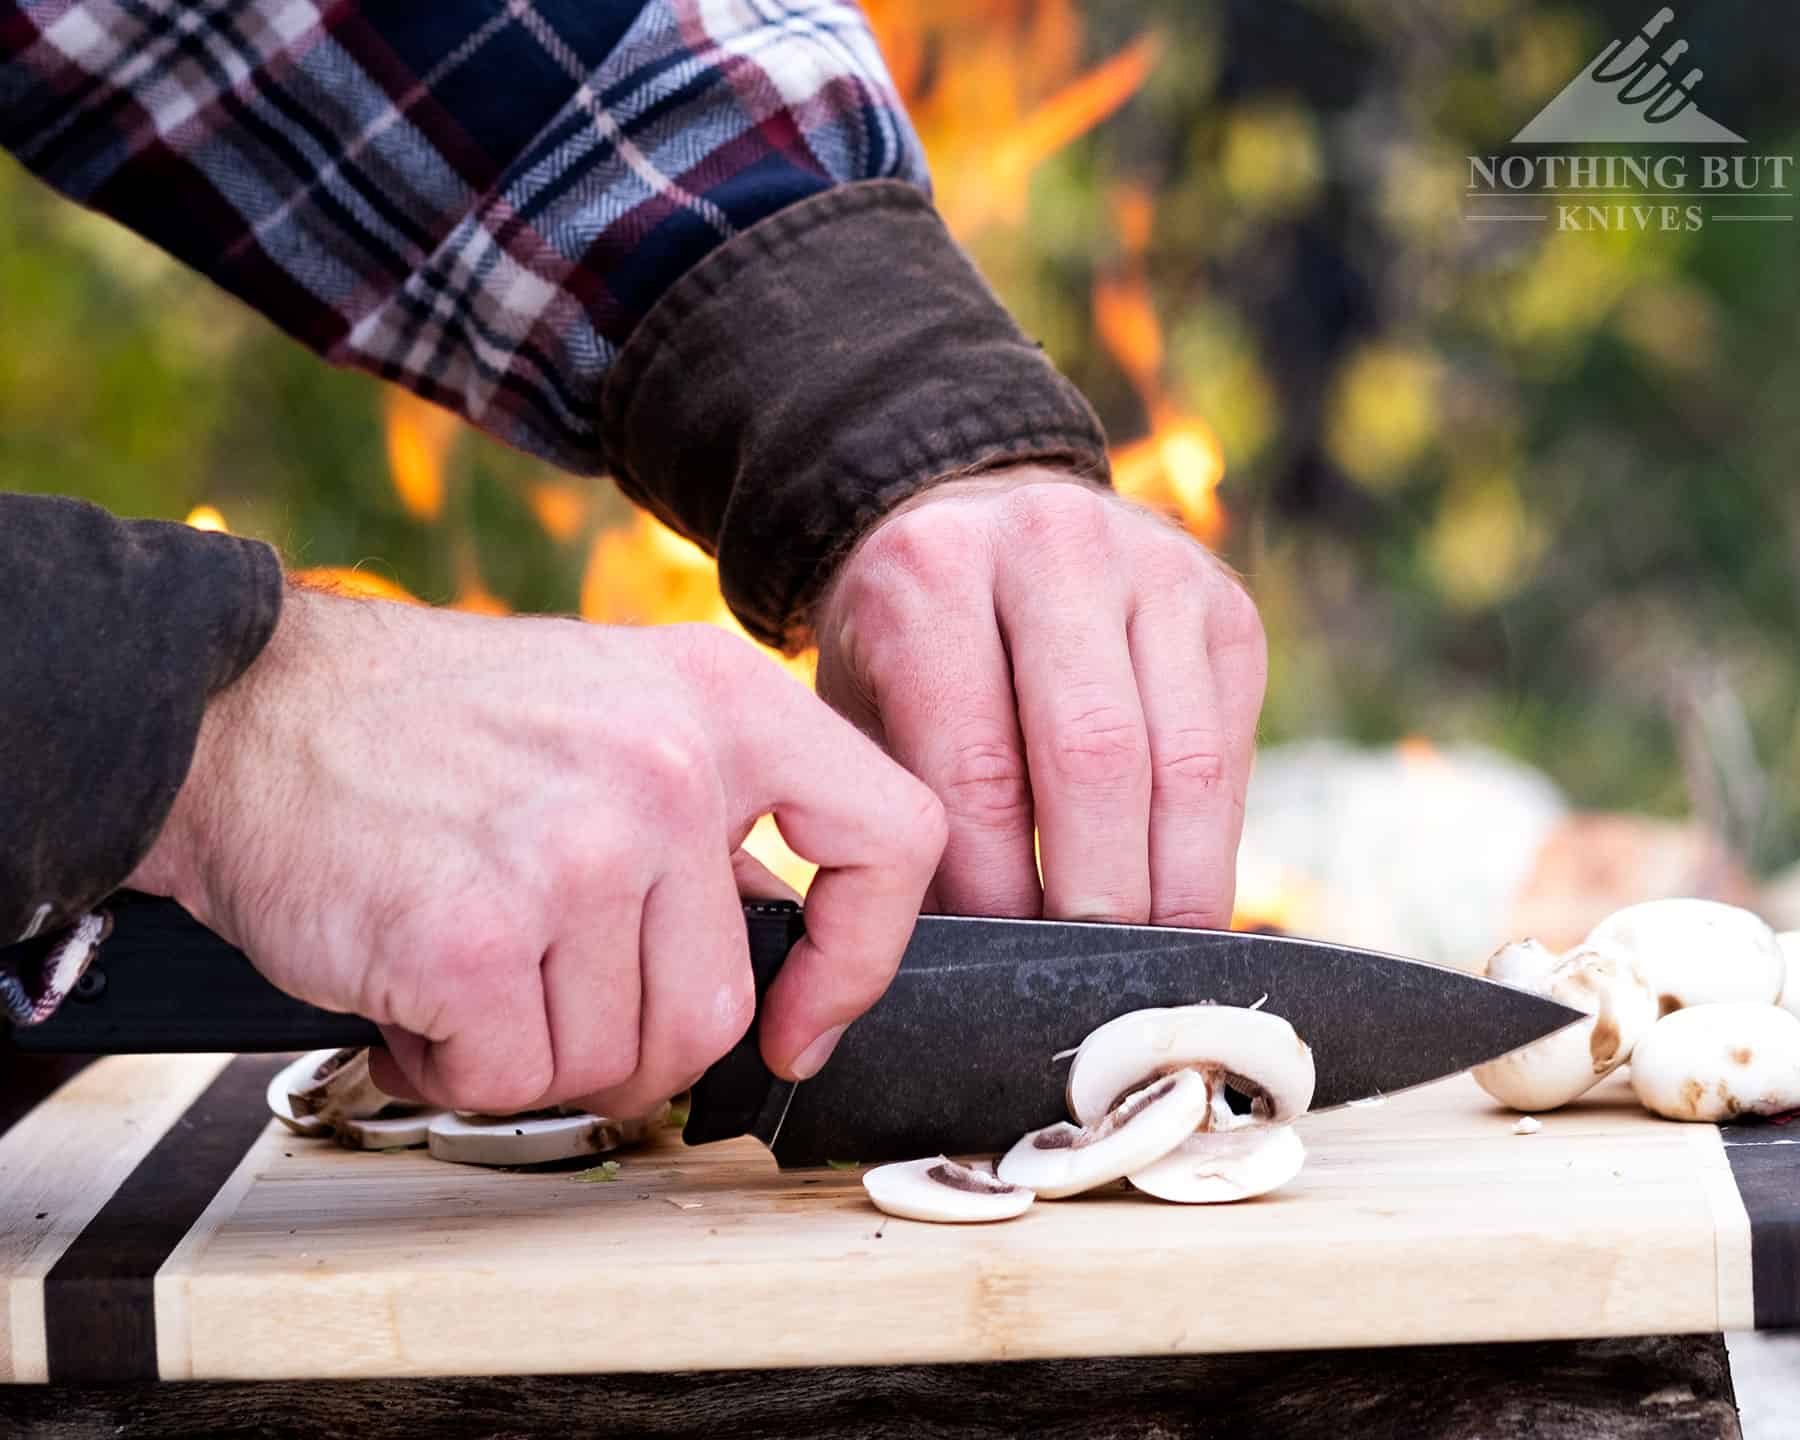 The Off-Grid Sierra has a blade that is a little shorter than a conventional chef kniofe blade, but it is more than capable around a campfire. 